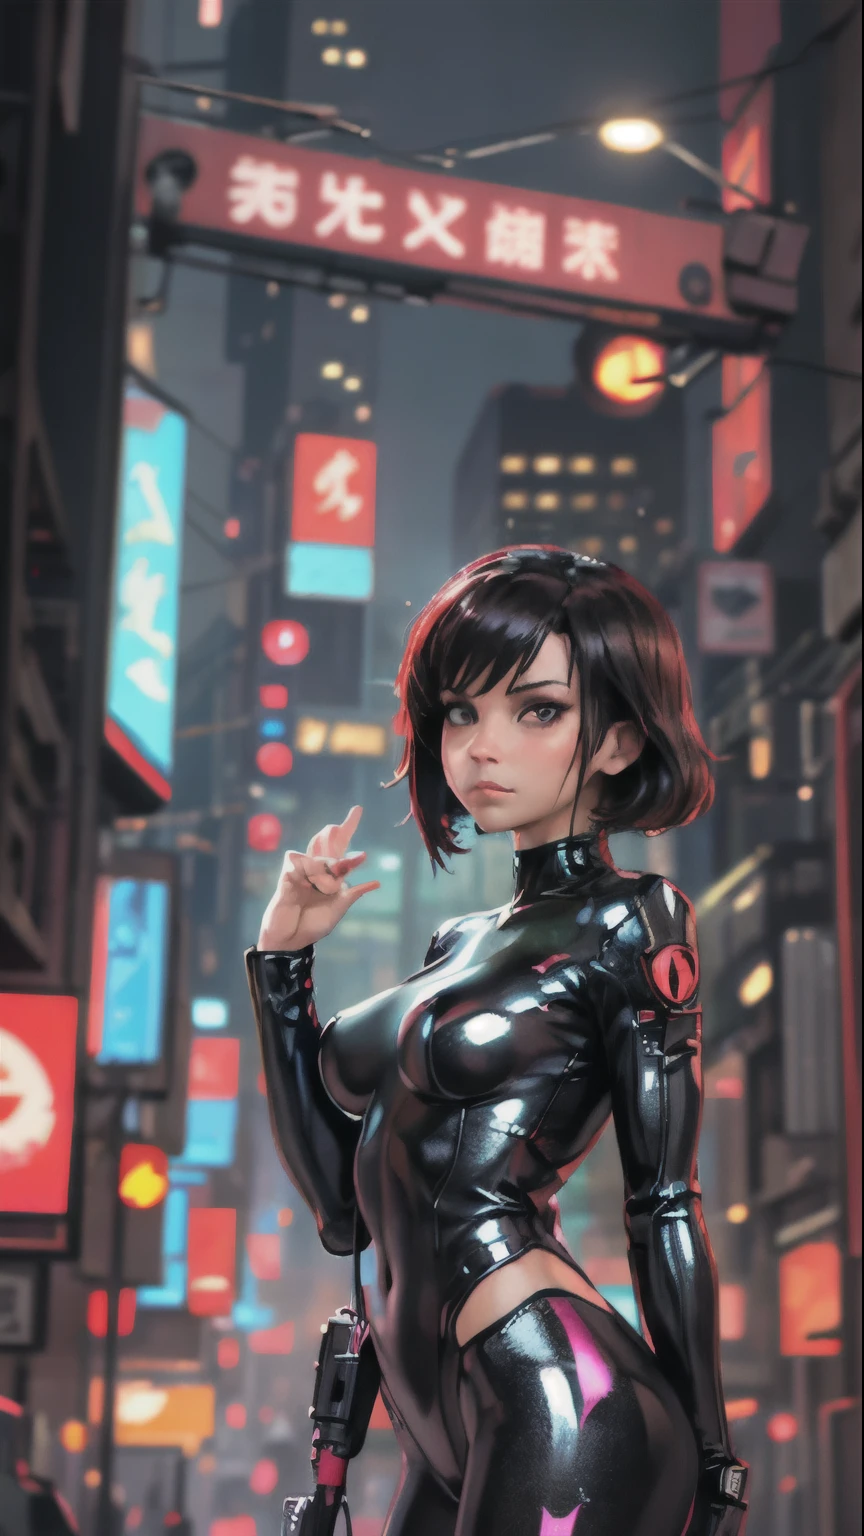 (best quality, ultra-detailed, photo-realistic:1.37), neon-lit cyberpunk cityscape, 1 woman standing, entering the scene. The woman has long flowing hair and a stylish futuristic outfit. Her beautiful detailed eyes are accentuated by the vibrant neon lights. The scene is set in a renowned red light district, with glowing signs and steam rising from the streets. The woman is standing near a window, gazing into its depths, curious about the forbidden allure within. The window emits a red glow, casting a seductive atmosphere. The woman's expression is a mix of curiosity and fascination, beckoning the viewer to enter the world behind the glass. The cyberpunk aesthetic of the scene is enhanced by the futuristic architecture and holographic displays adorning the buildings. The city is enveloped in a captivating red and blue color palette, emphasizing the seductive and mysterious ambiance. The scene is illuminated by neon lighting, creating vibrant reflections on the wet streets below. The combination of the woman's alluring presence and the cyberpunk setting evokes a sense of intrigue and adventure.